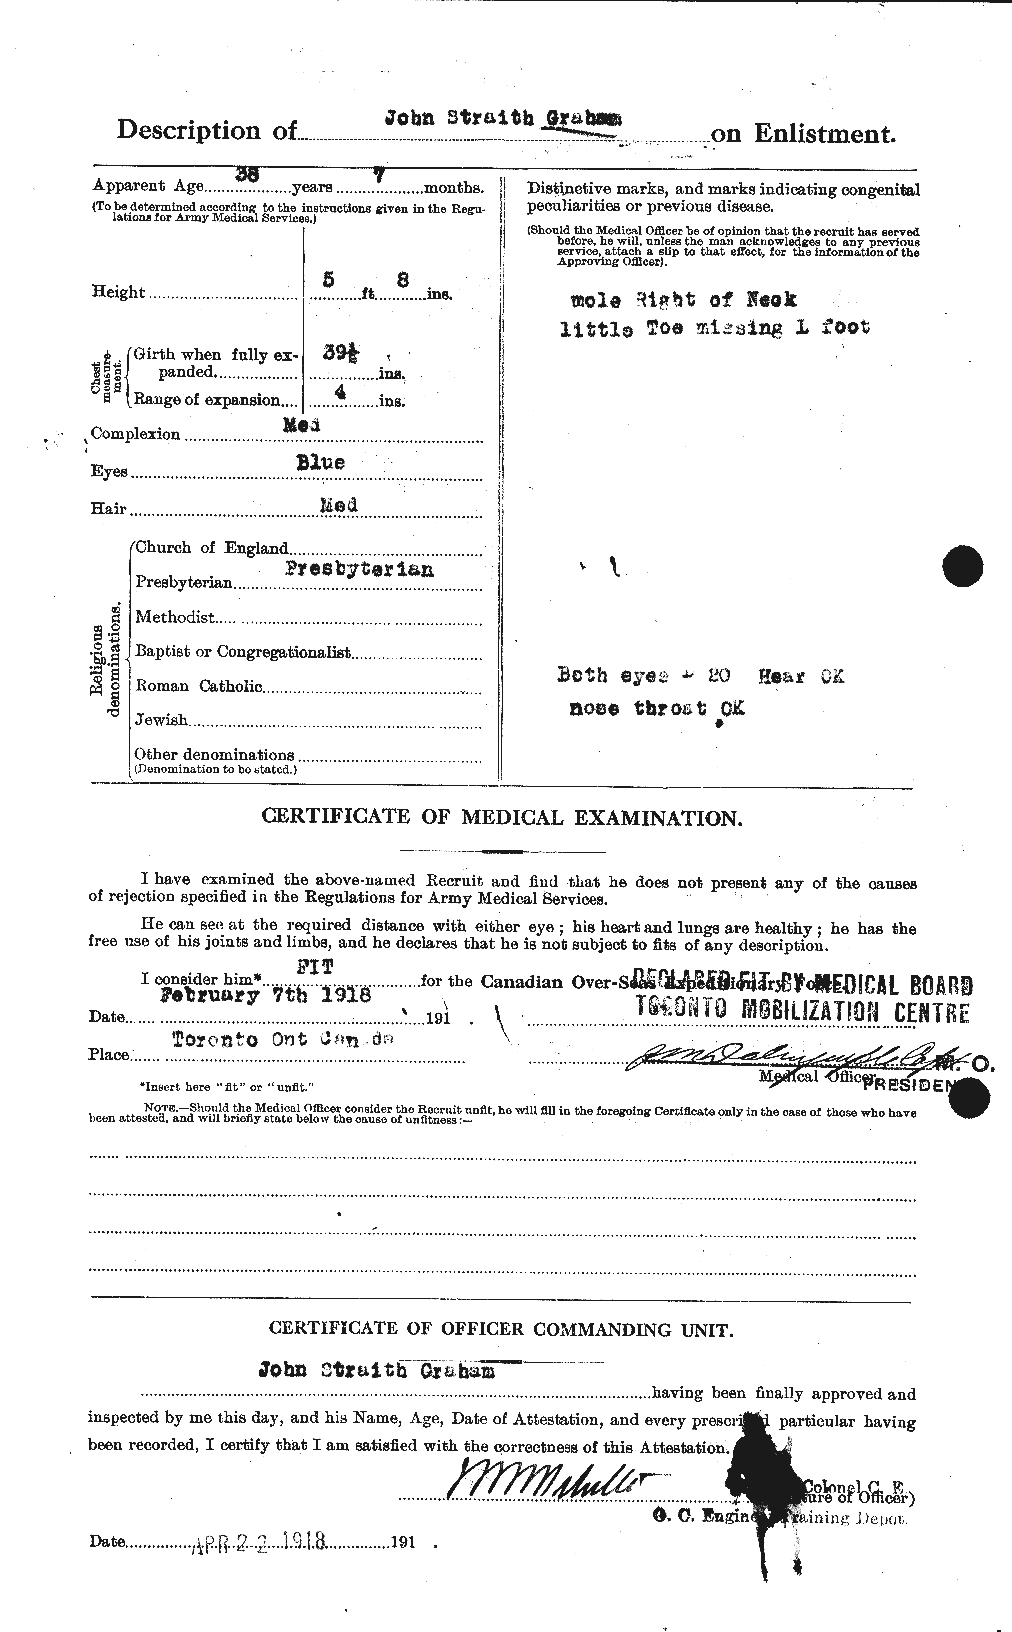 Personnel Records of the First World War - CEF 359211b